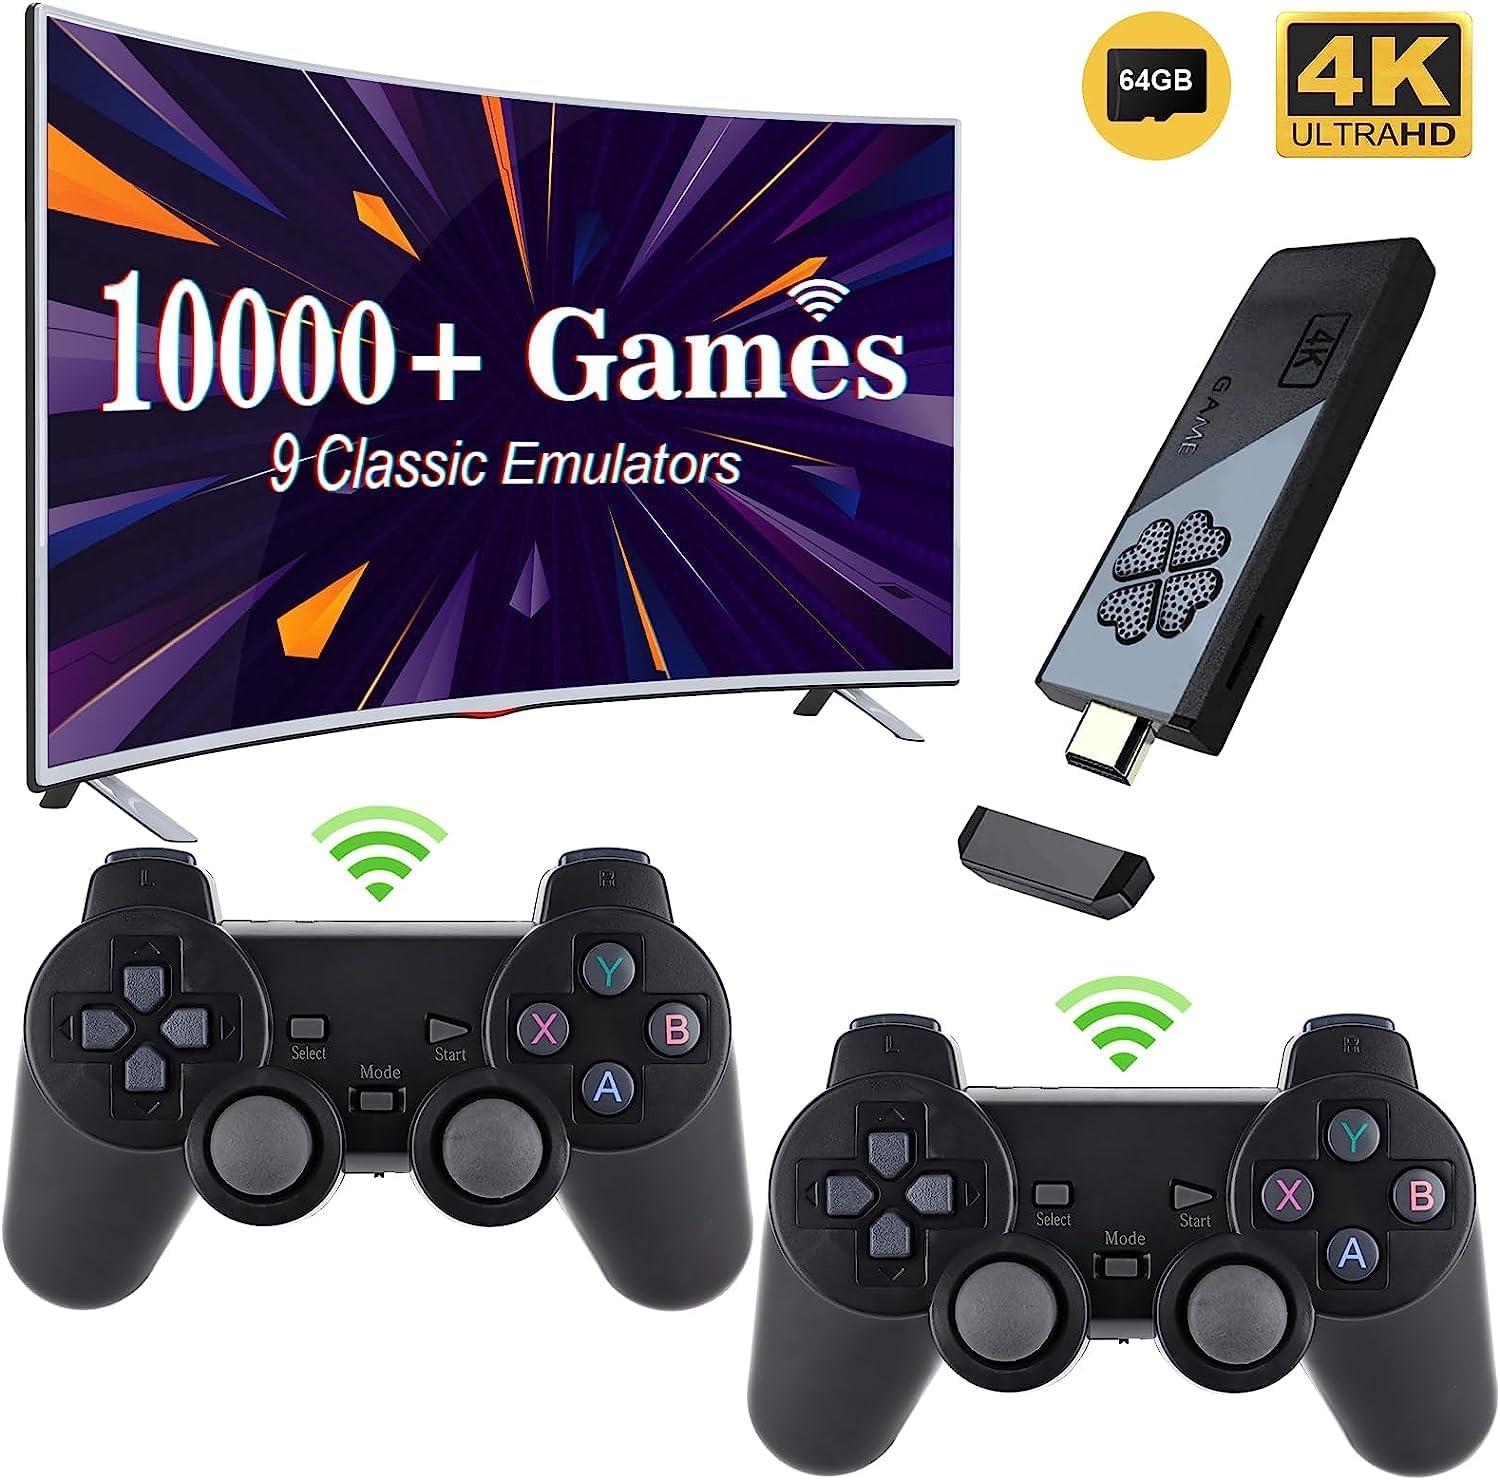 Retro Game Console, Nostalgia Stick Game,Retro Game Stick,Plug and Play Video Game Stick Built in 10000+ Games,4K HDMI Output,9 Classic Emulators, with Dual 2.4G Wireless Controllers(64G)